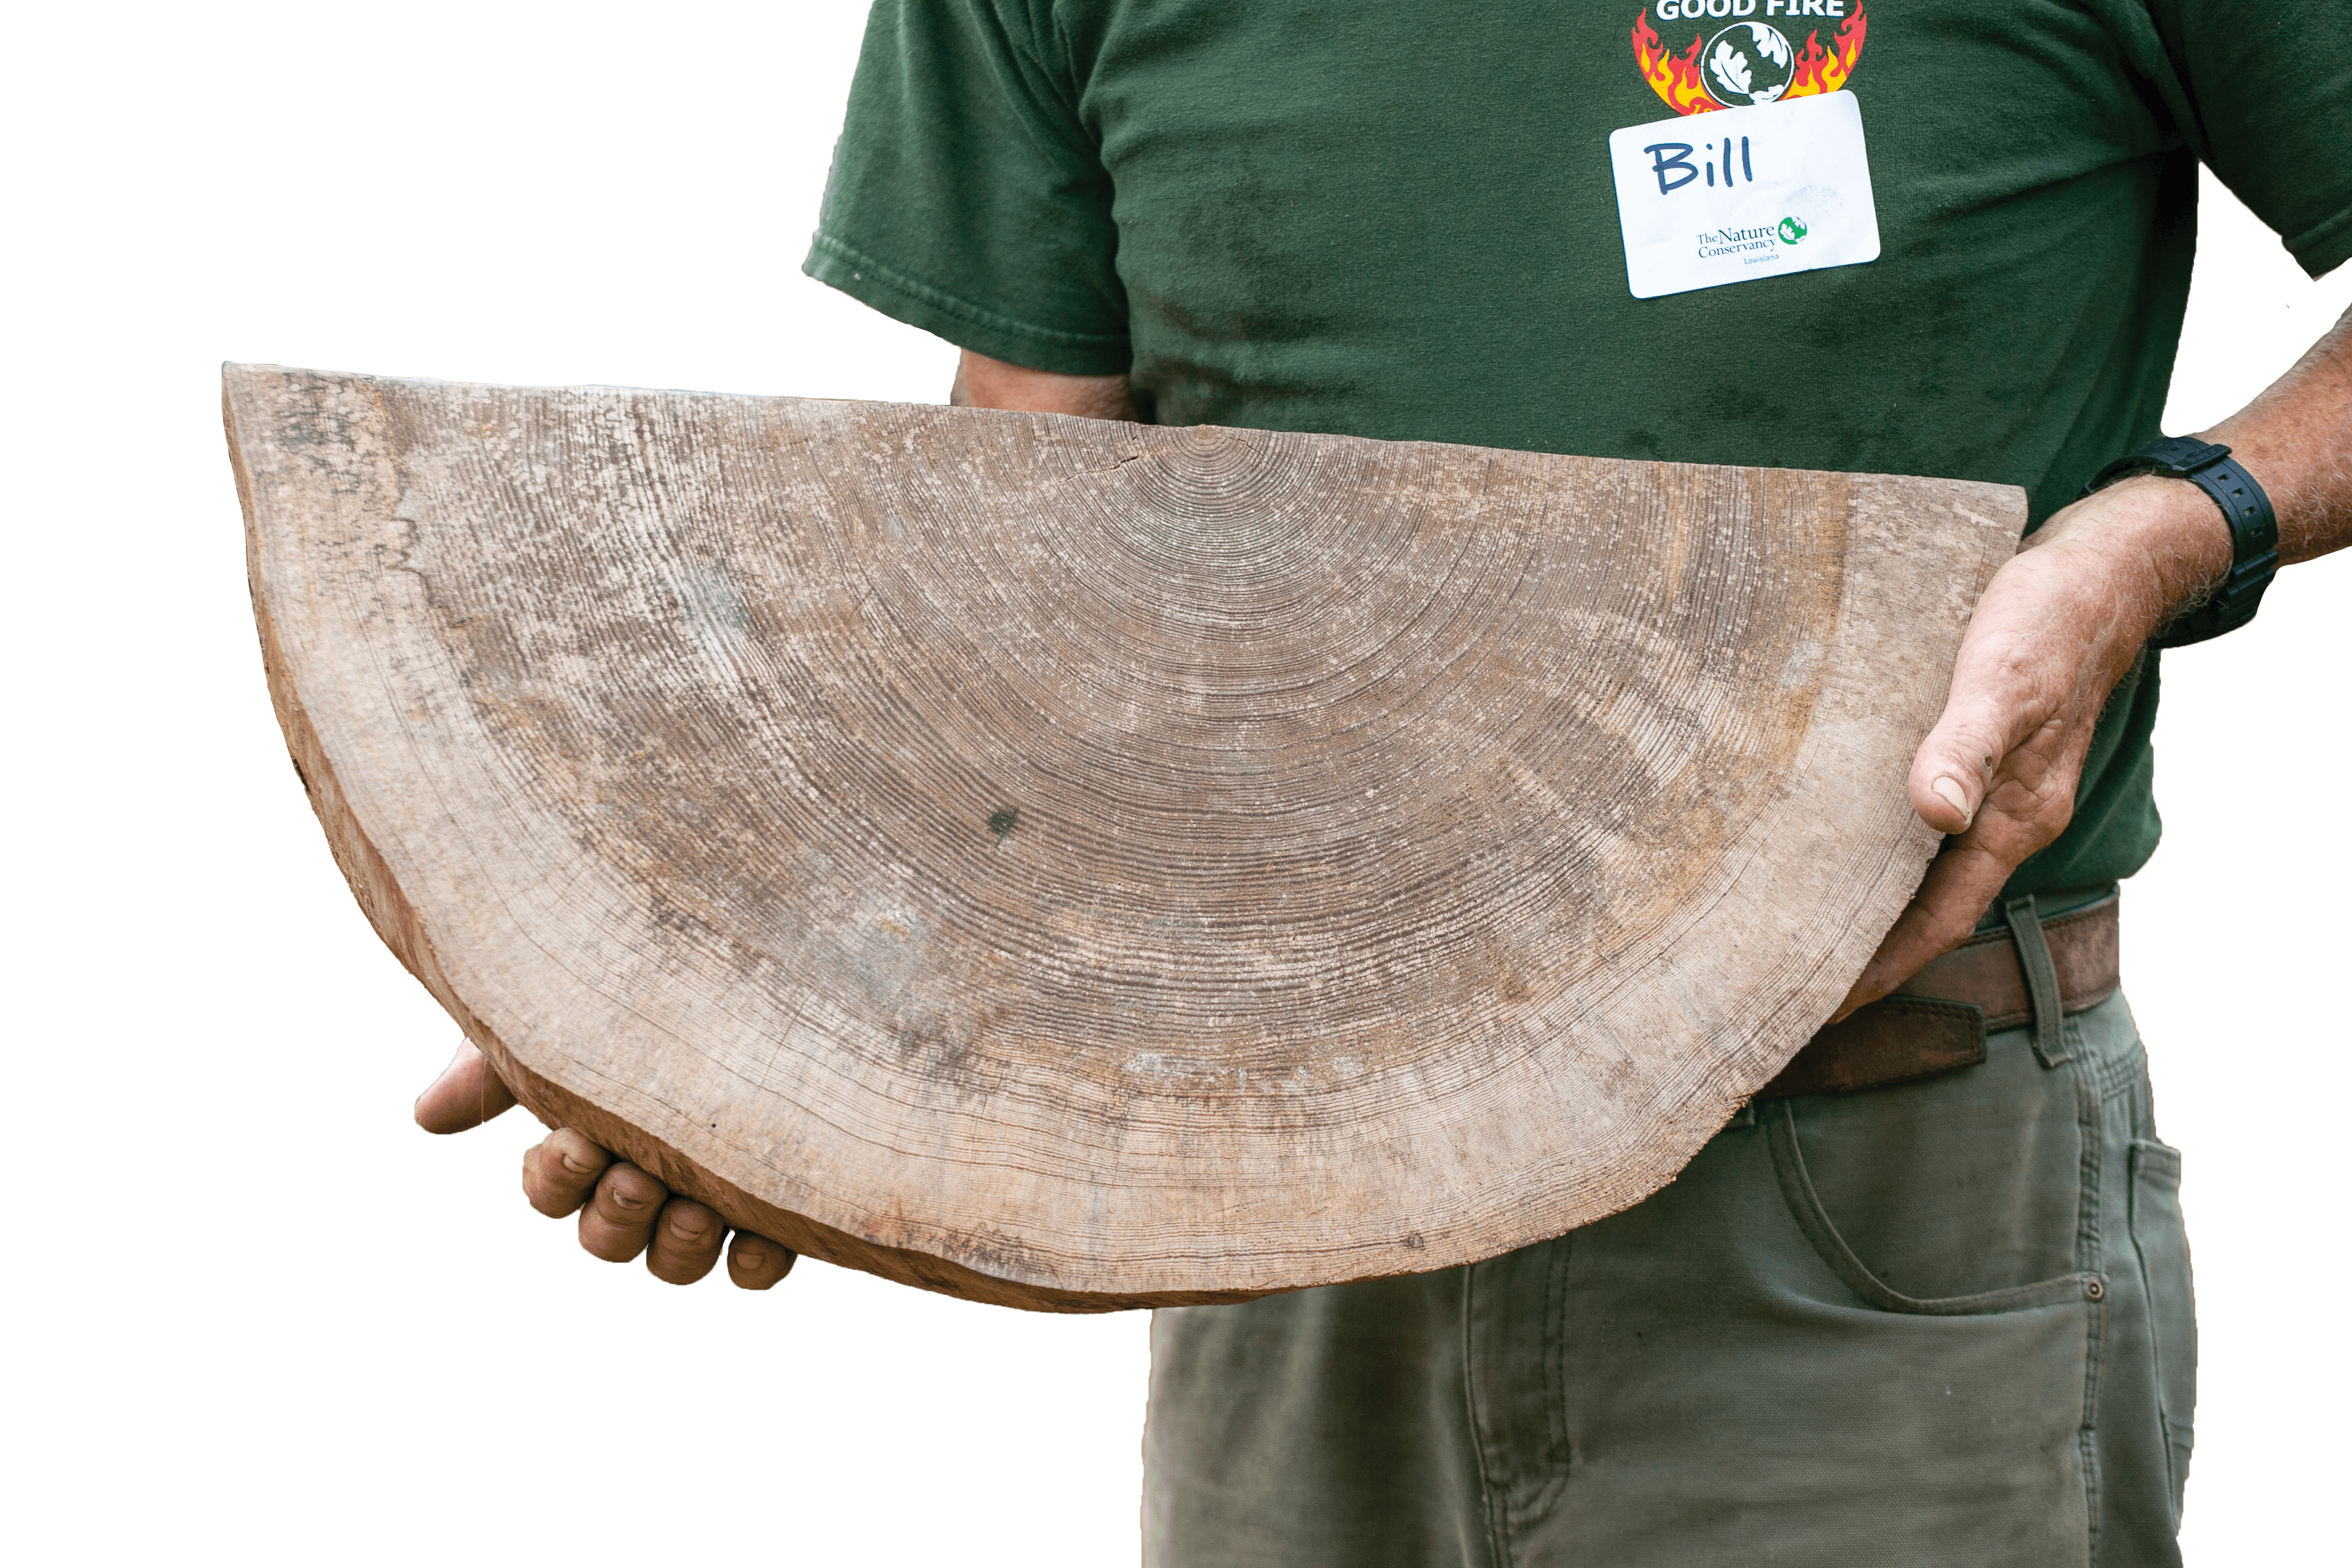 A person with a green shirt holds a piece of a tree trunk.